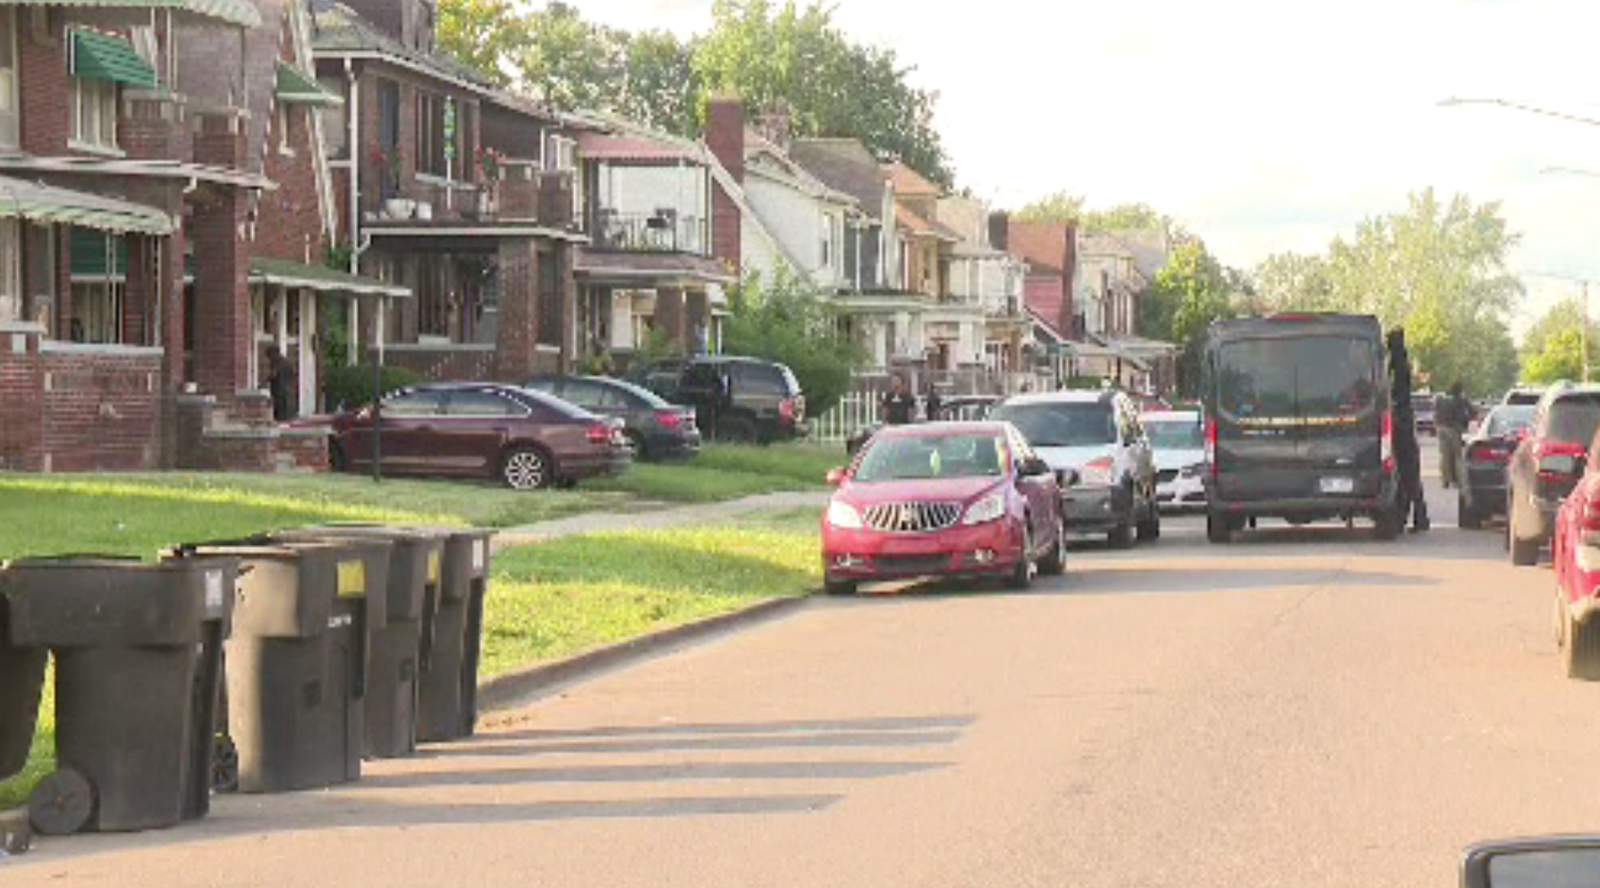 Teen hospitalized after accidental shooting in Detroit, police say